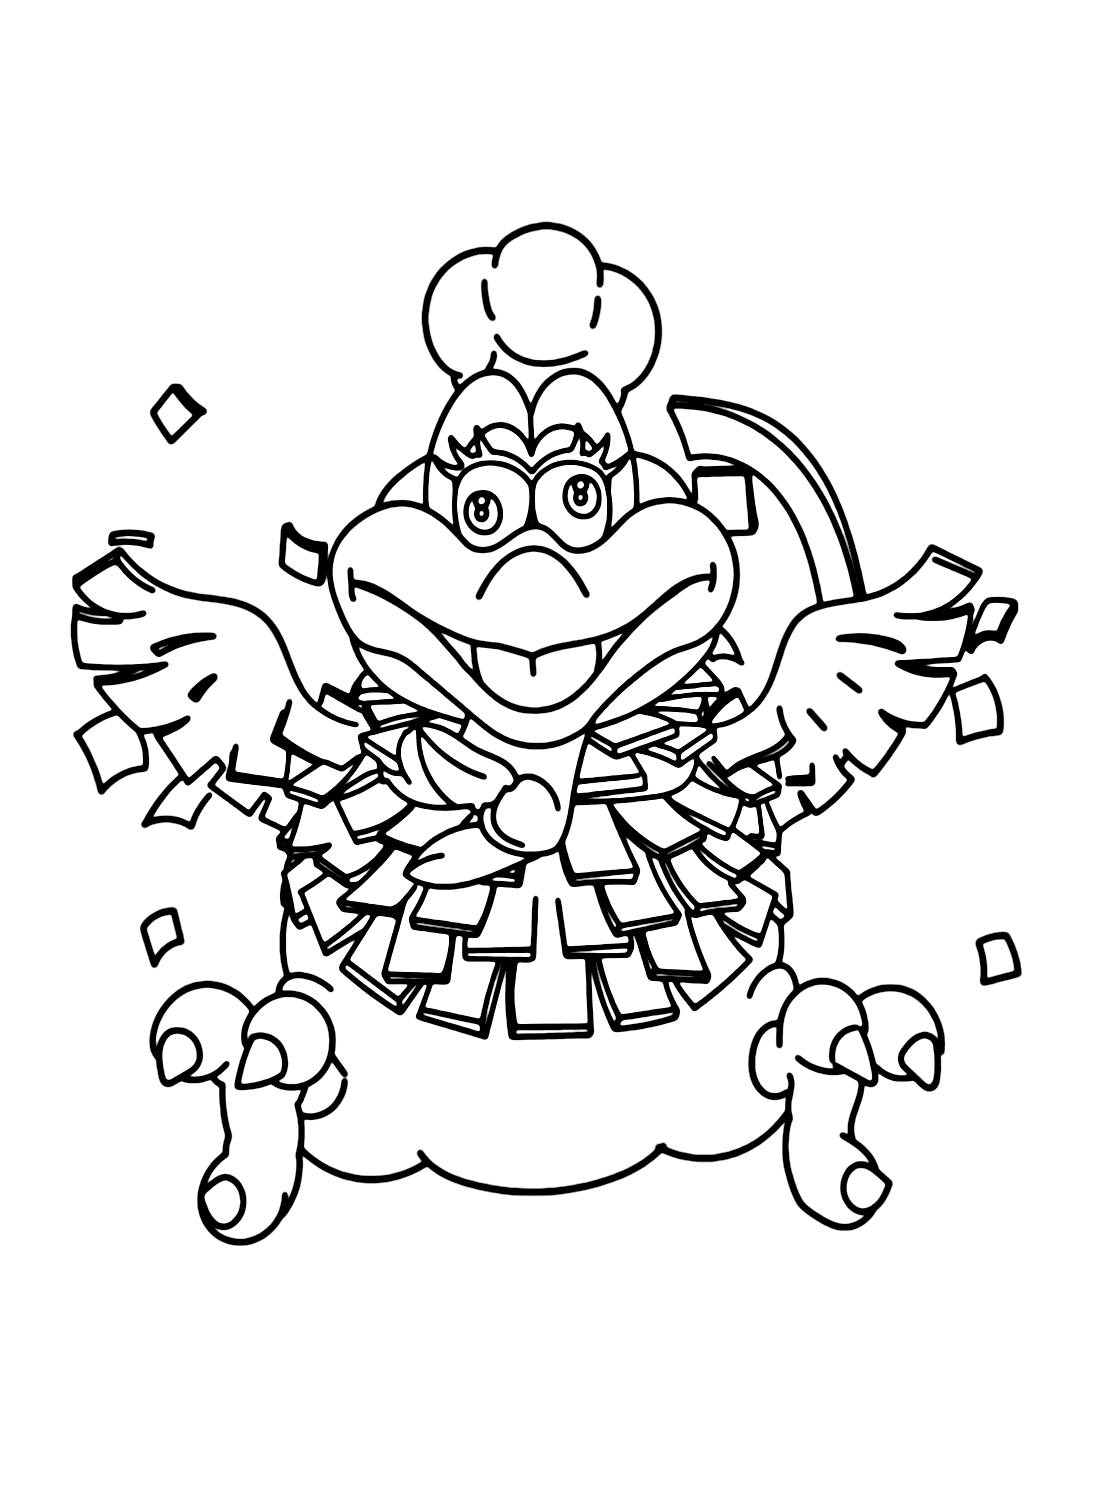 Cookatiel from Super Mario Odyssey Coloring Pages